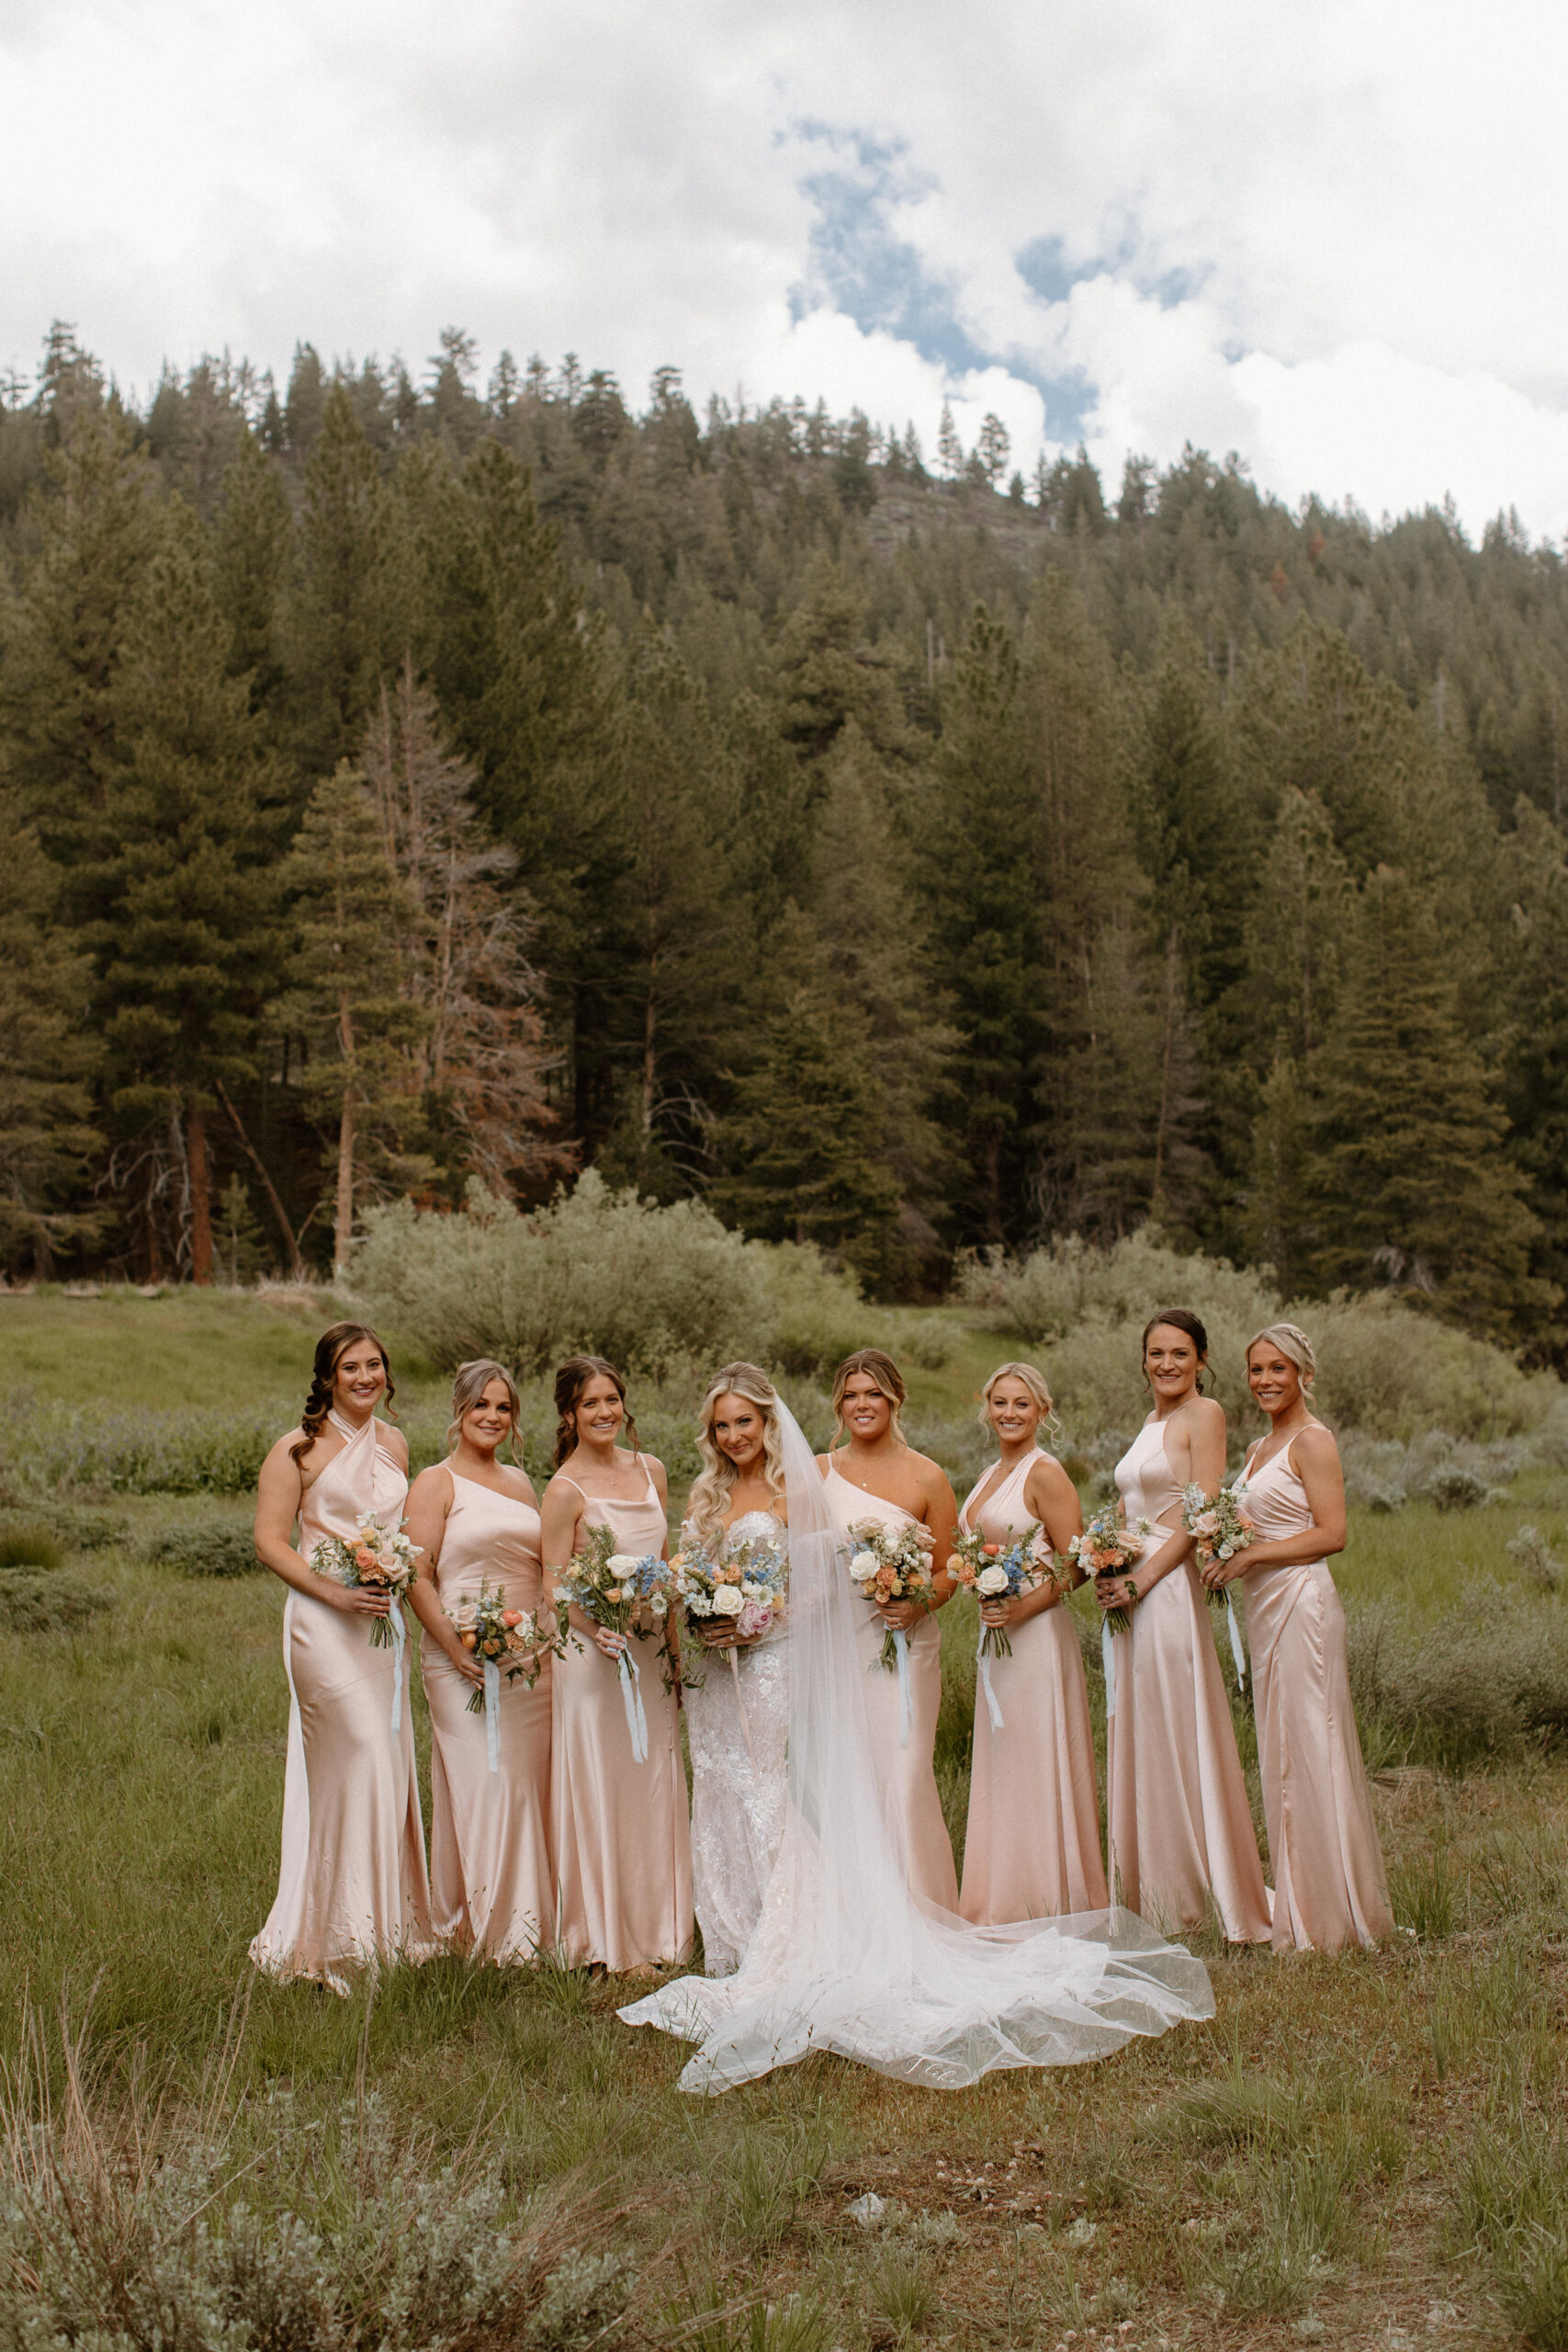 beautiful bride and bridemaids pose together in the stunning California nature